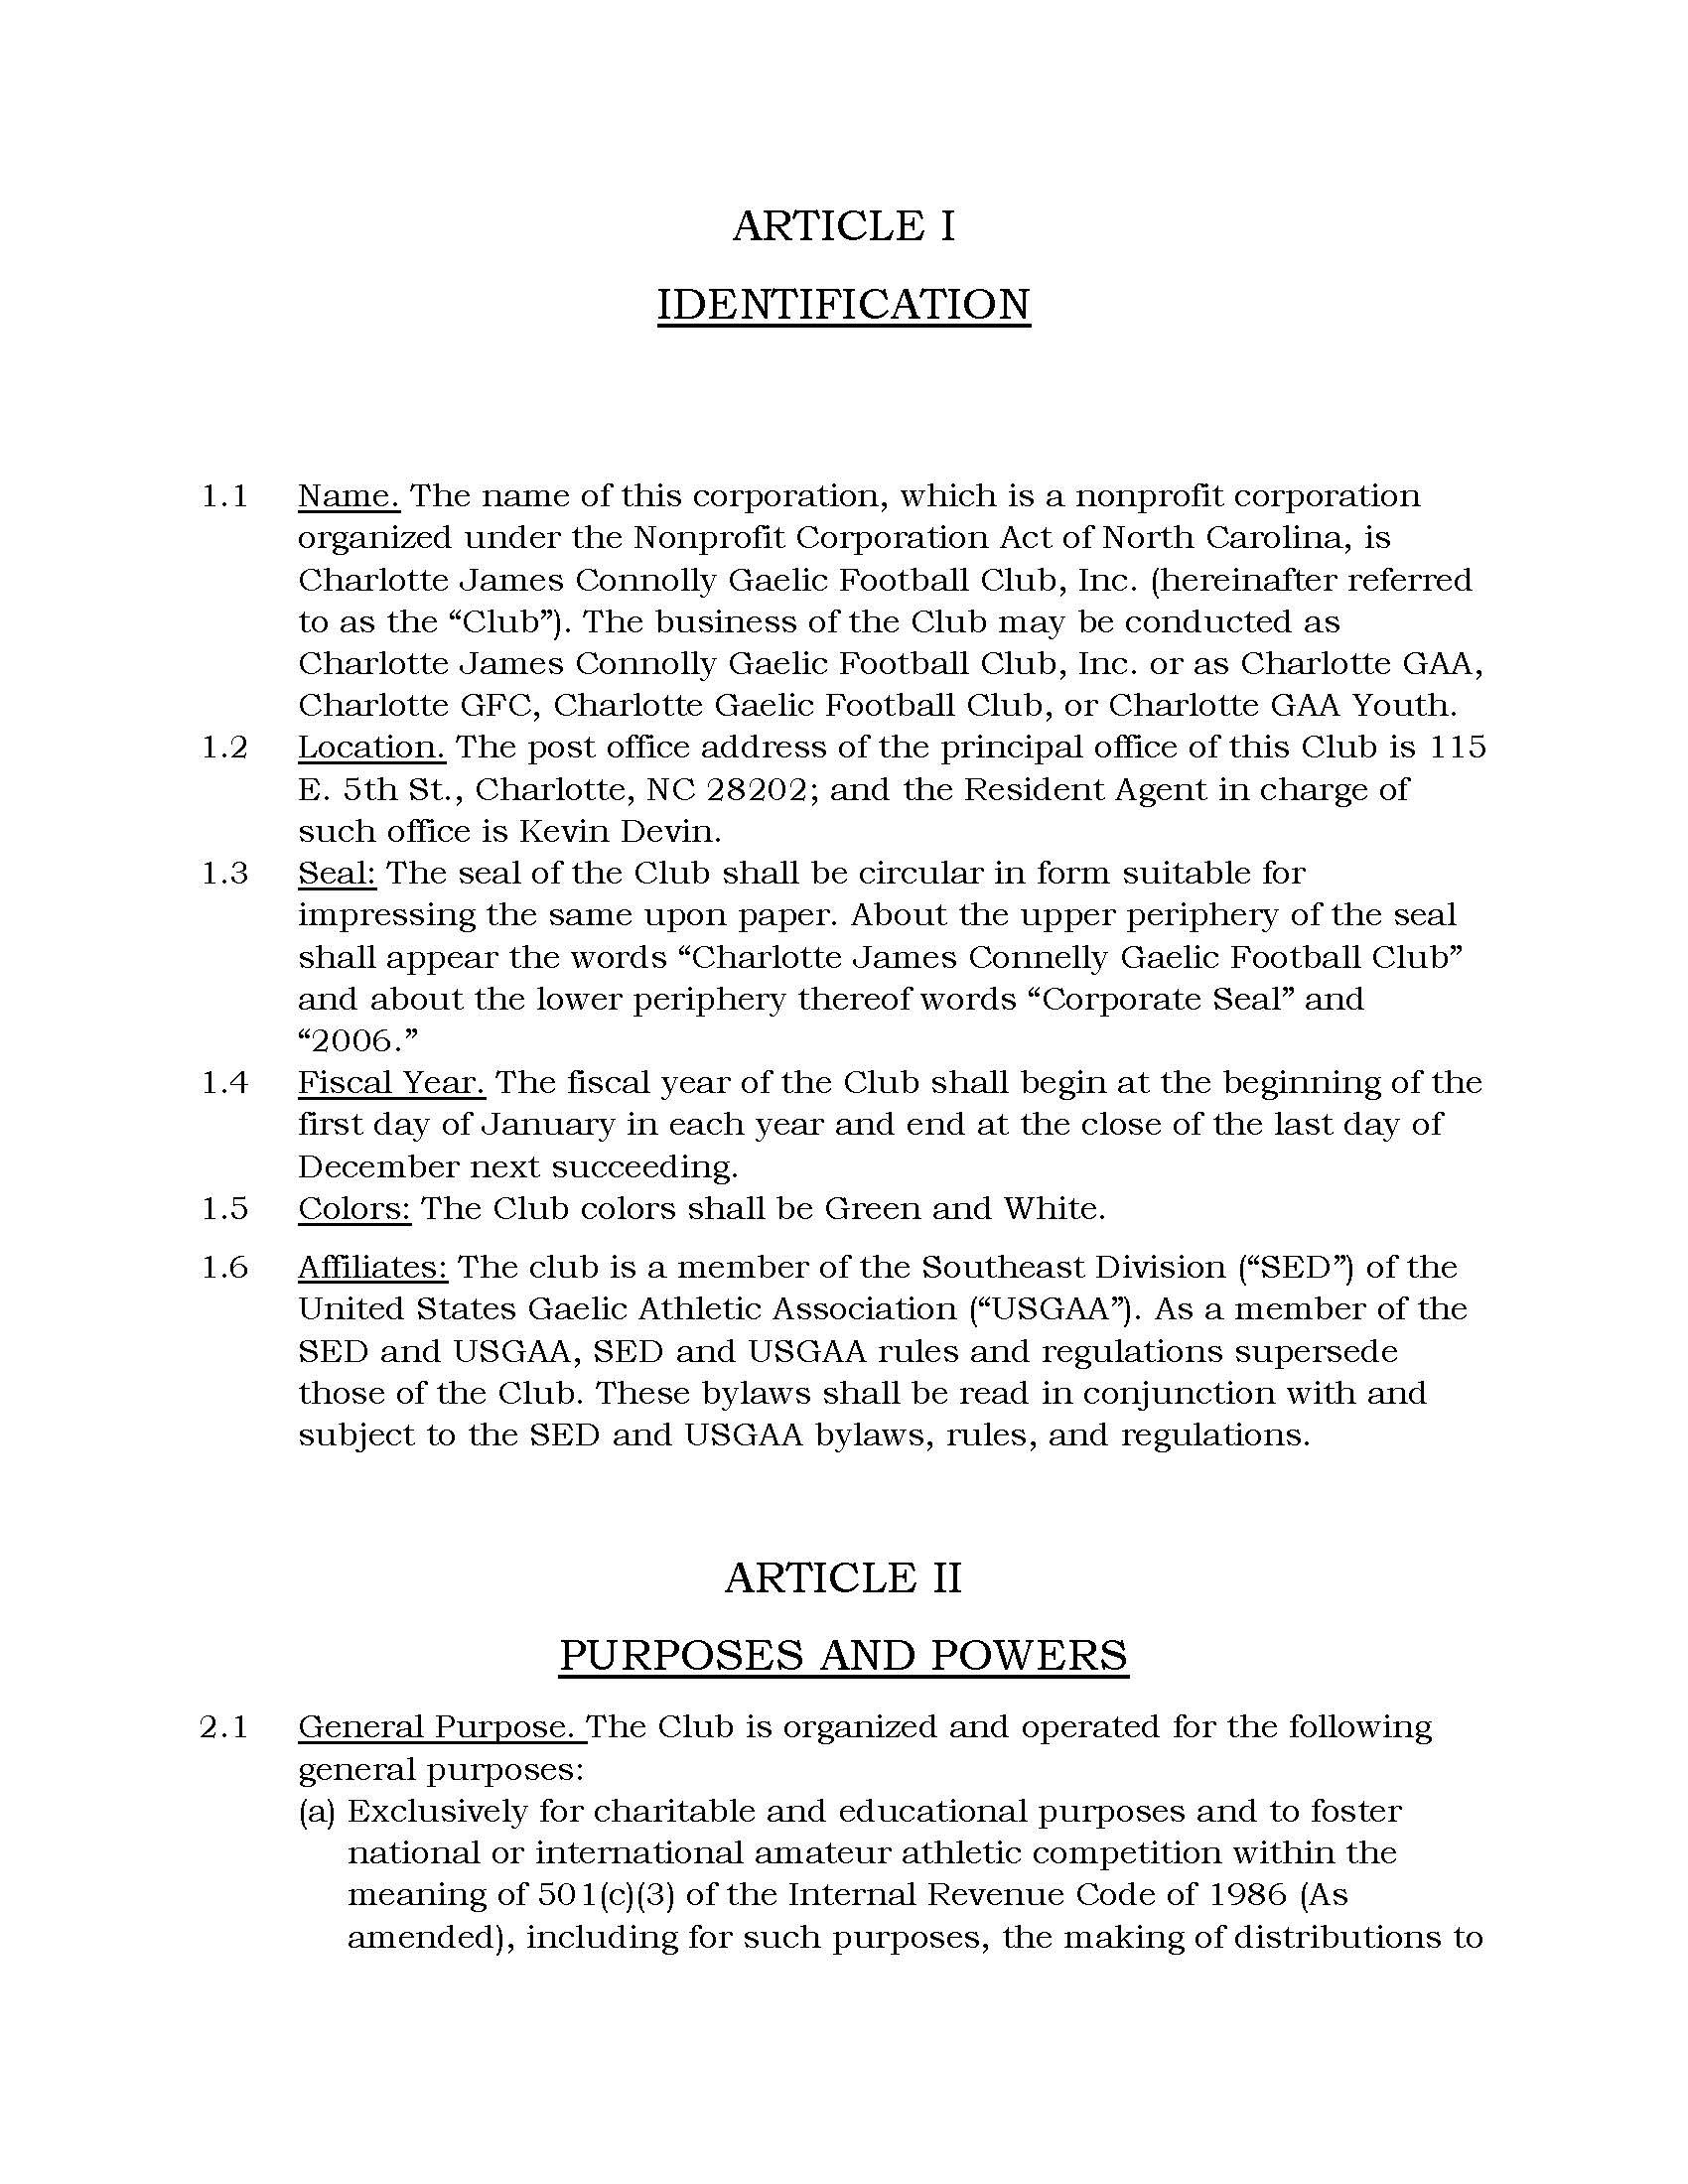 Bylaws of Charlotte James Connolly Gaelic Football Club_12.12.21_Page_02.jpg